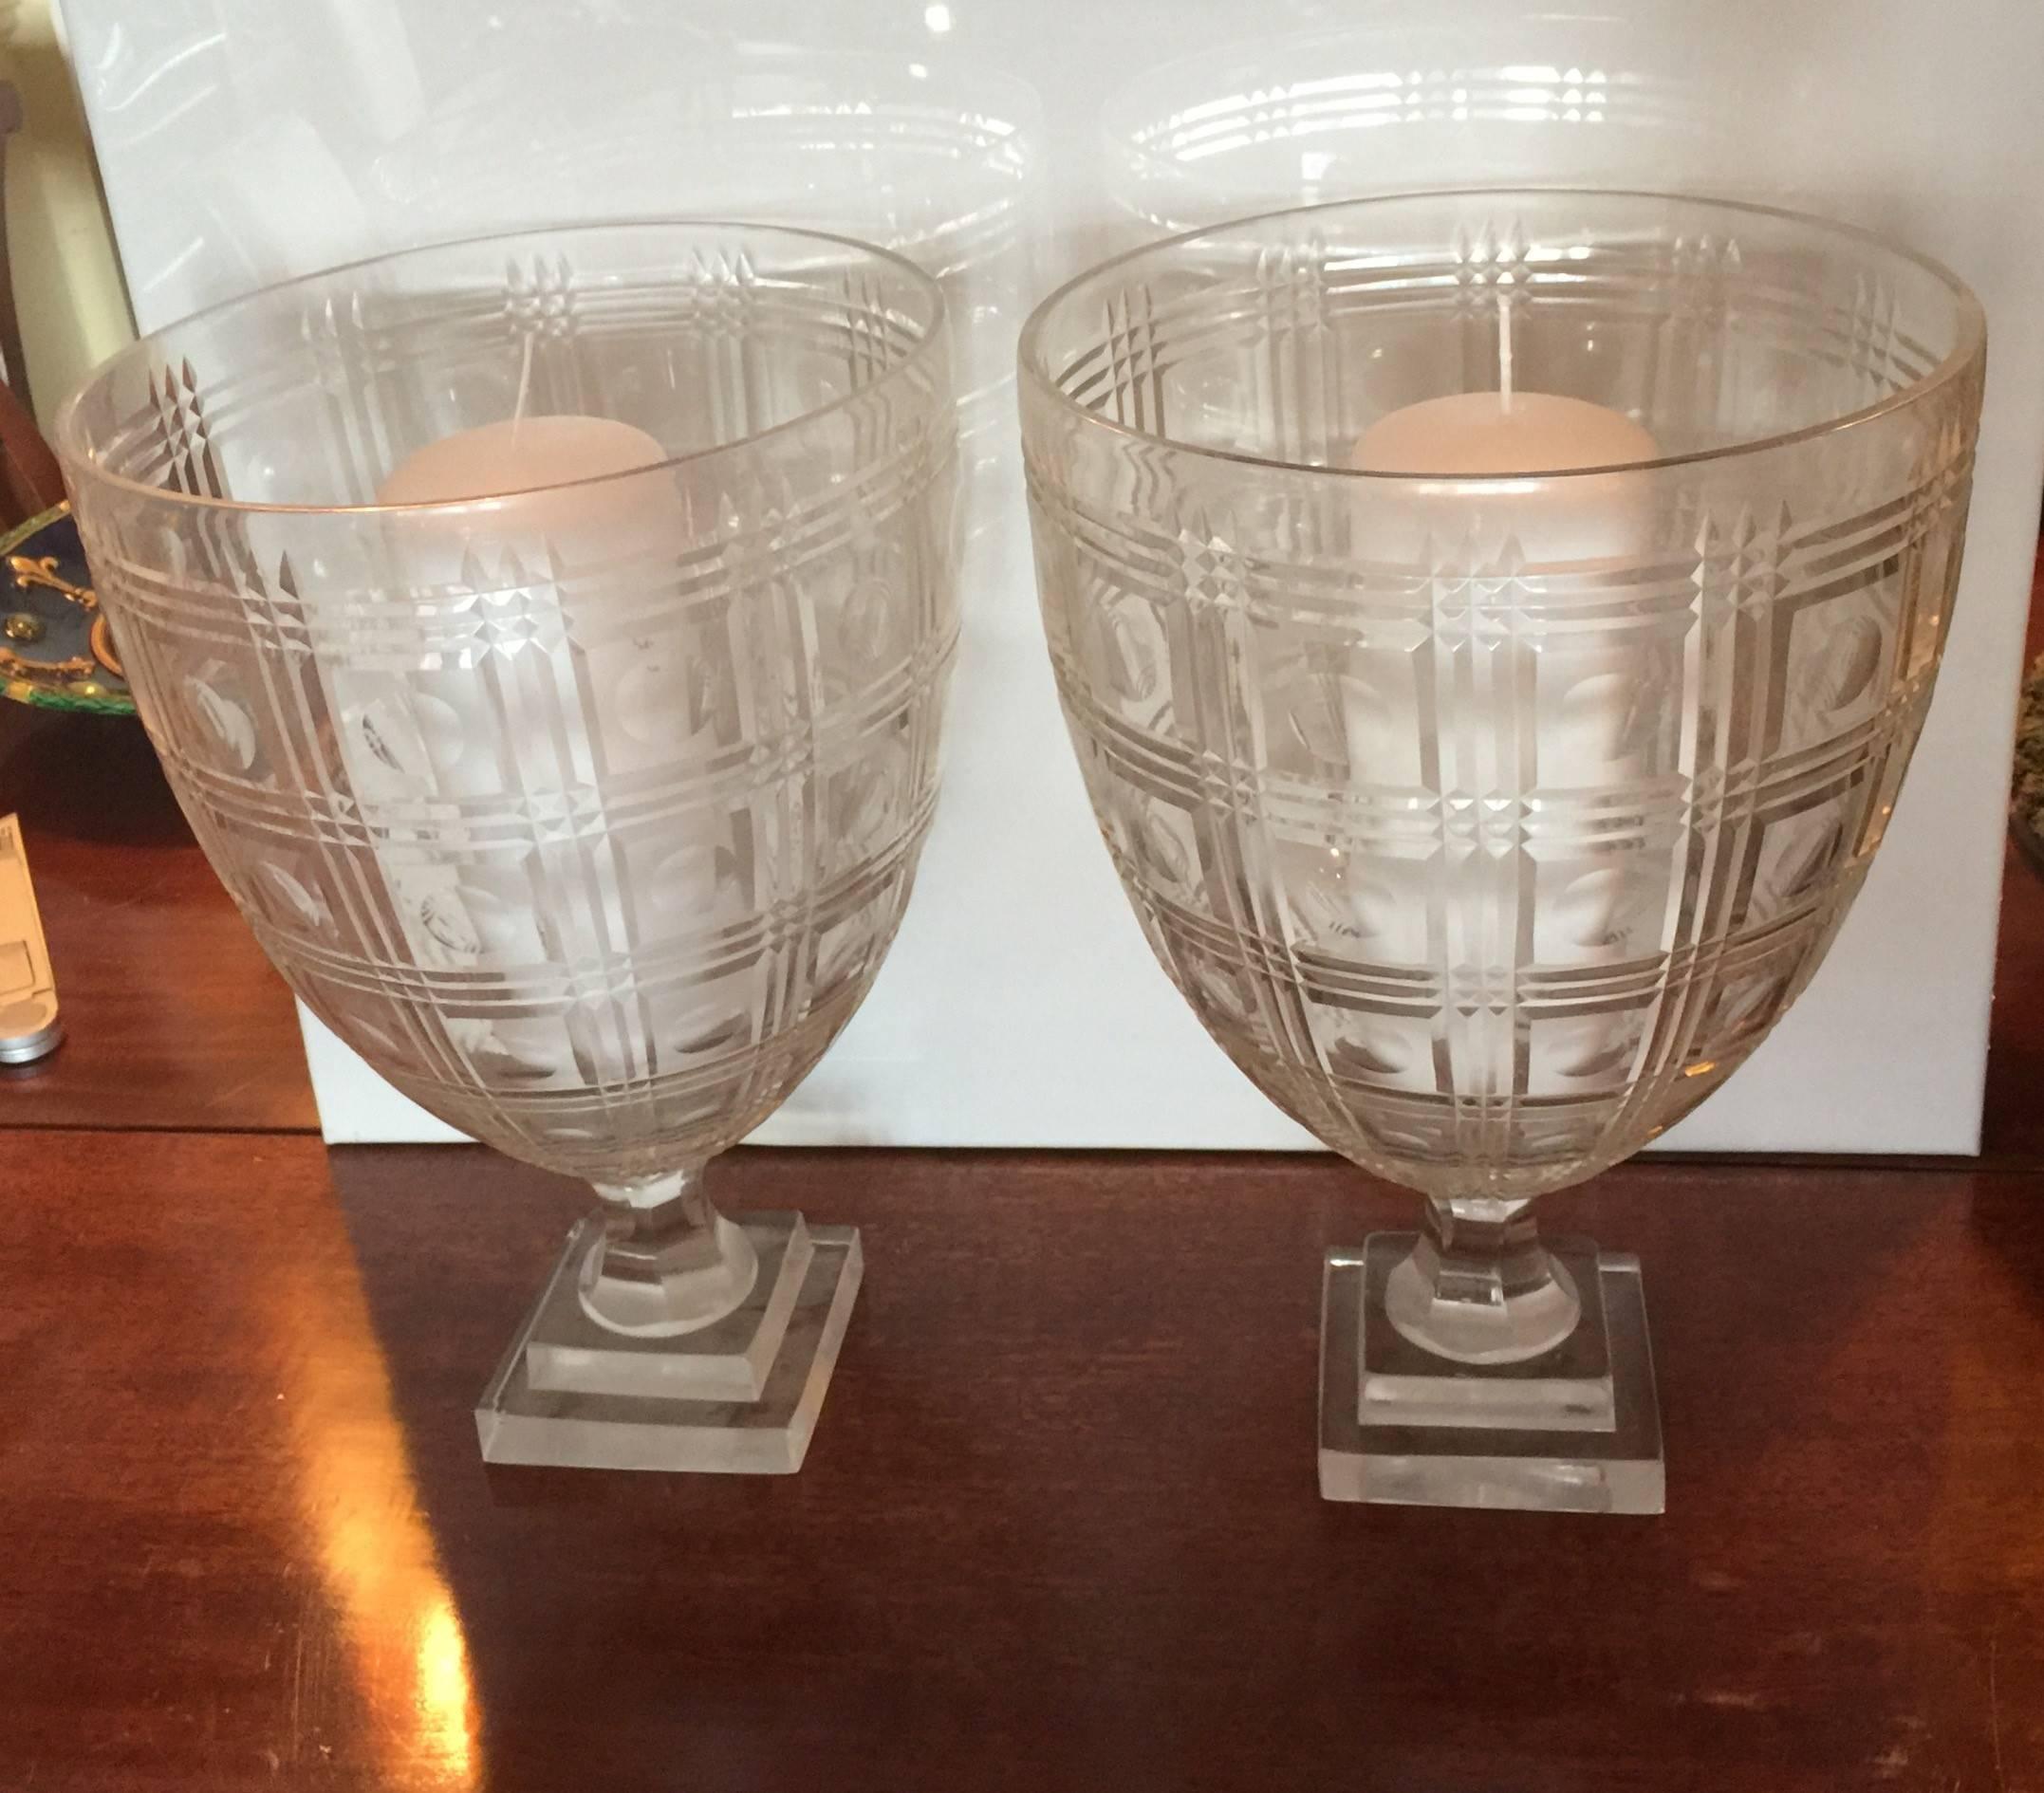 The large photophores, also know as hurricane shades or candle holders, incised with circles within a trellis pattern.